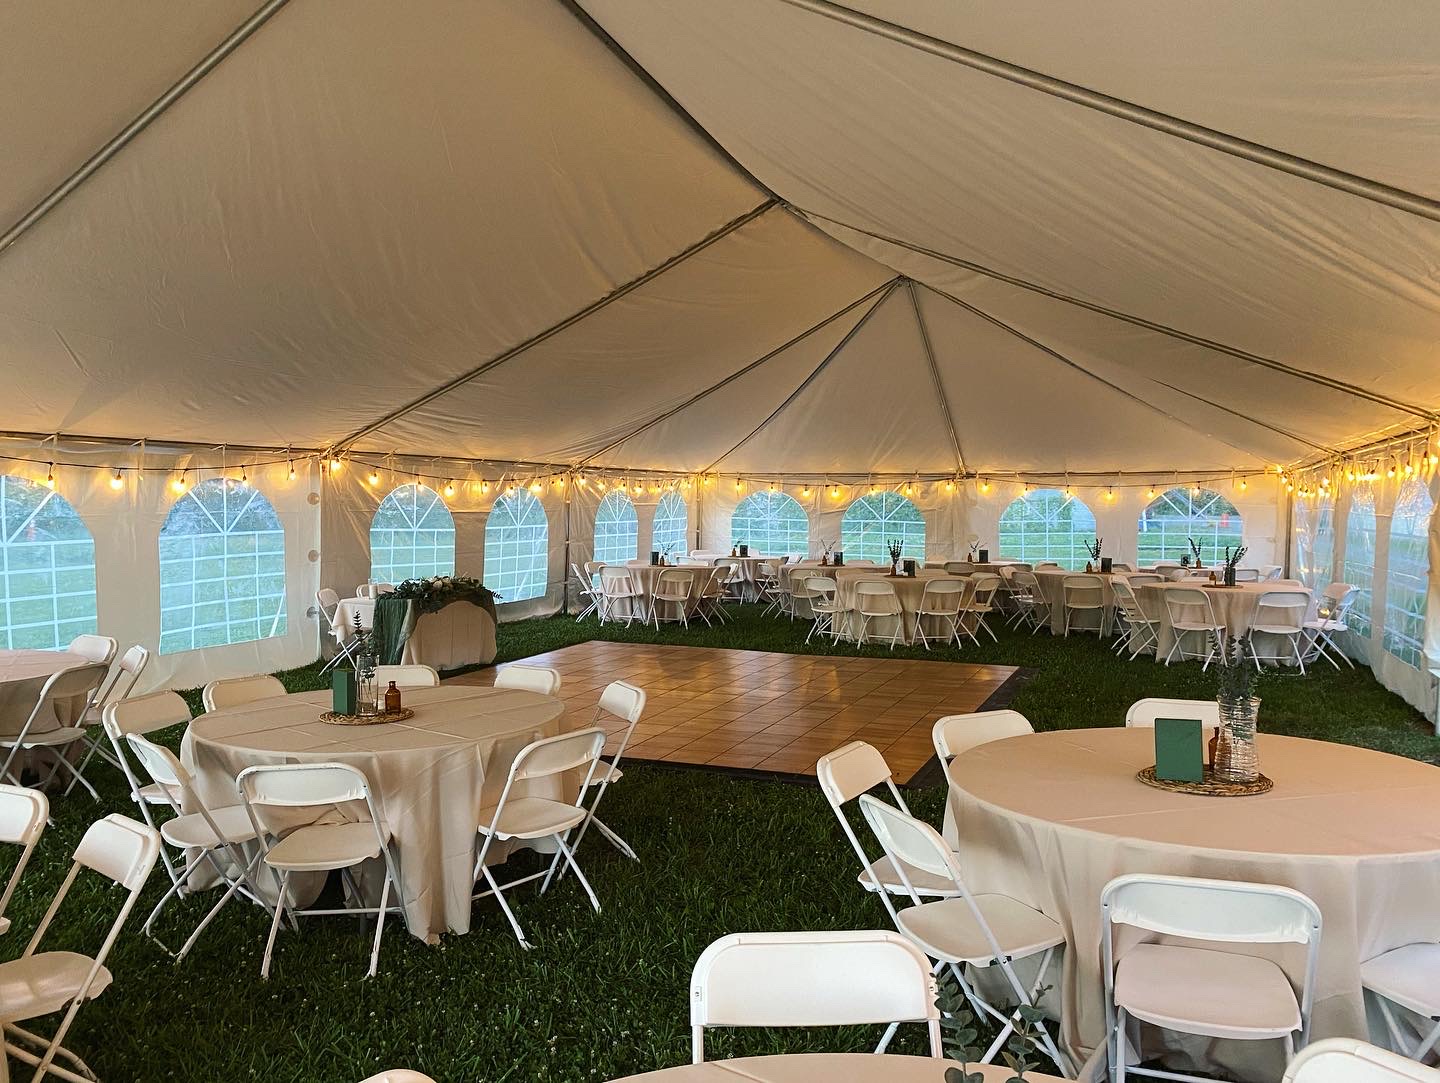 30x60 Wedding Tent Package Rental in Perry Hall, MD